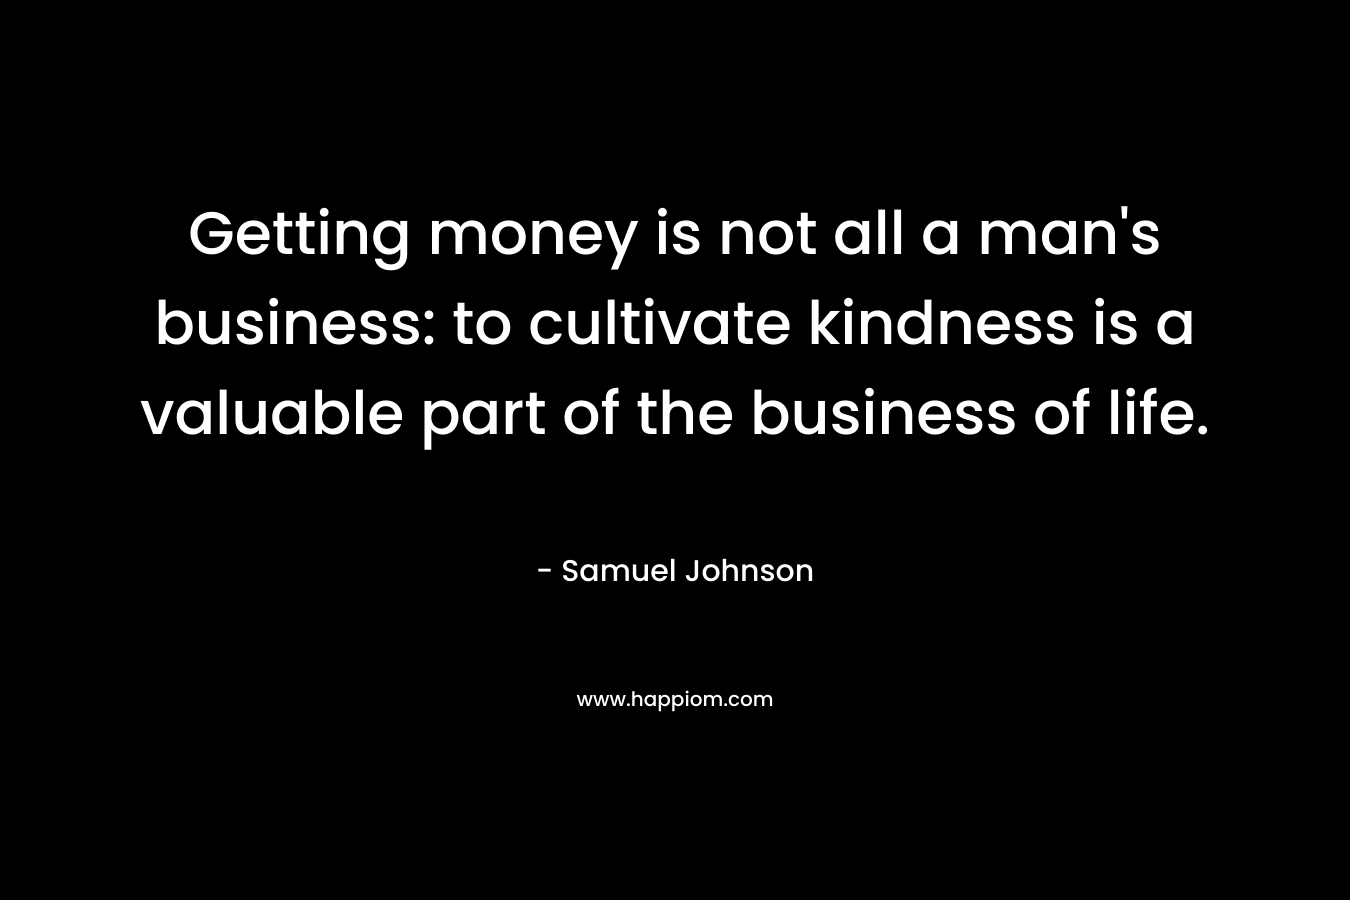 Getting money is not all a man's business: to cultivate kindness is a valuable part of the business of life.